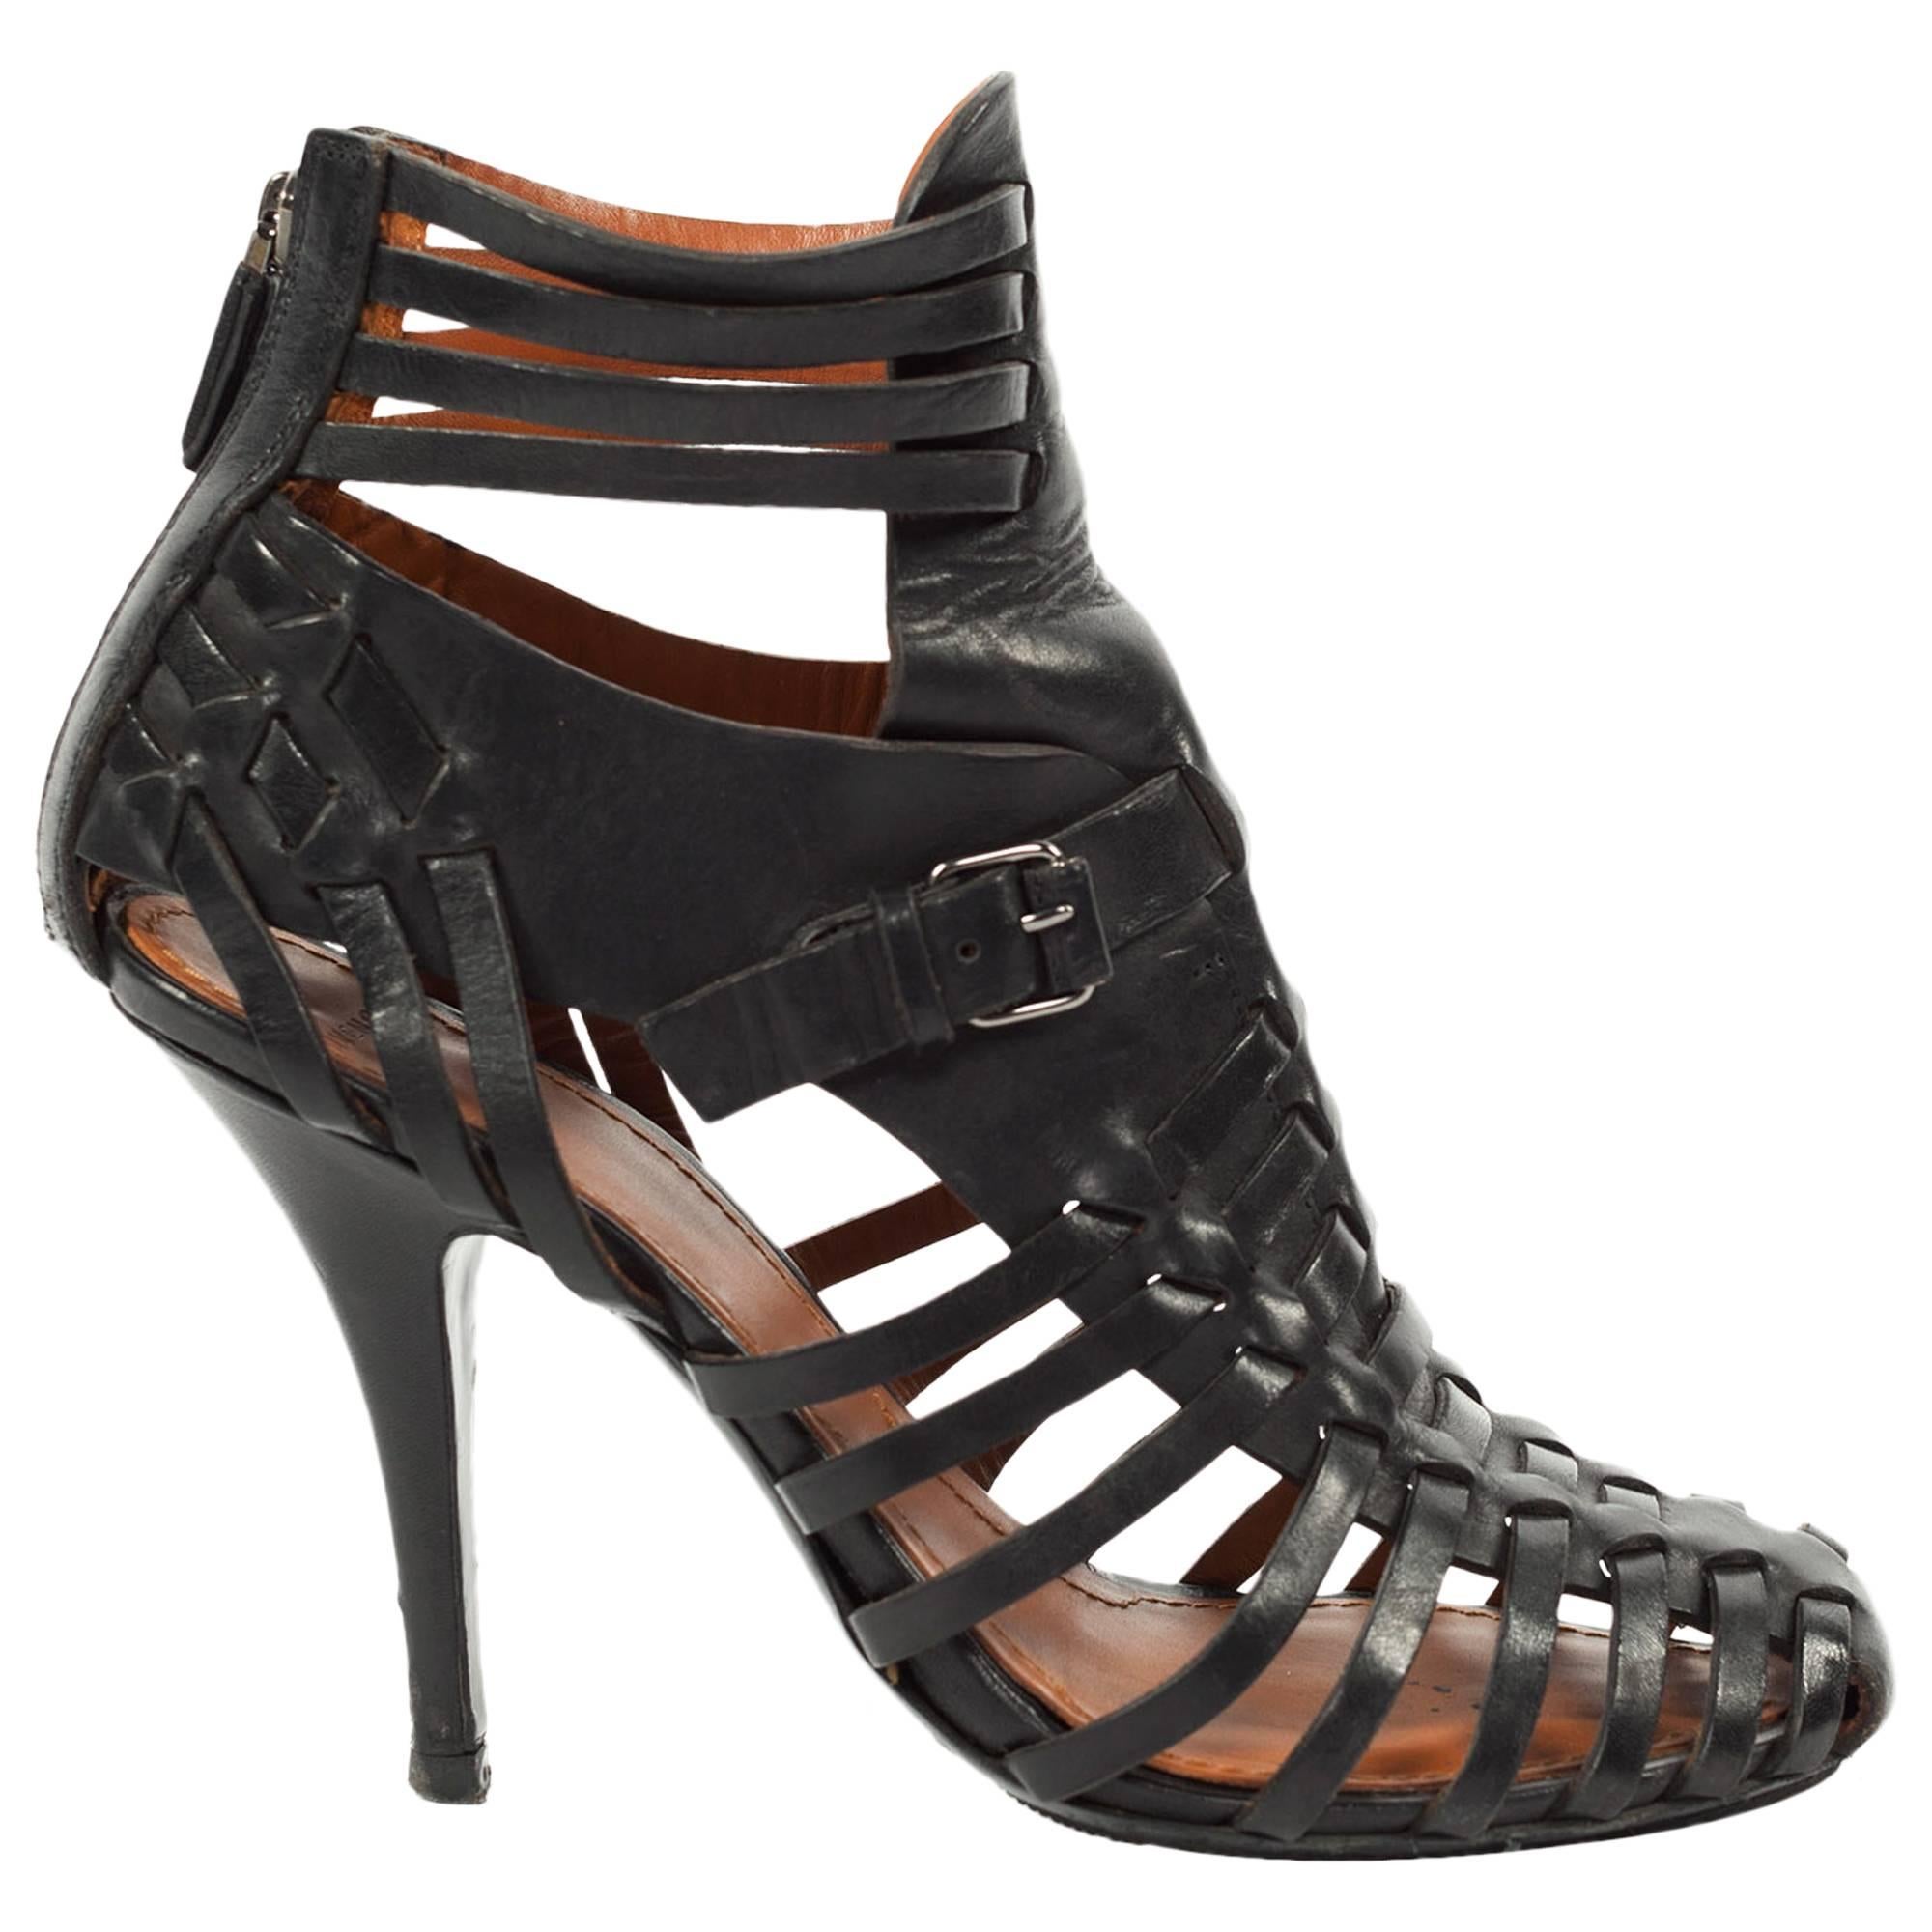 Givenchy Gladiator - For Sale on 1stDibs | givenchy gladiator sandals, givenchy  gladiator heels, givenchy gladiator boots